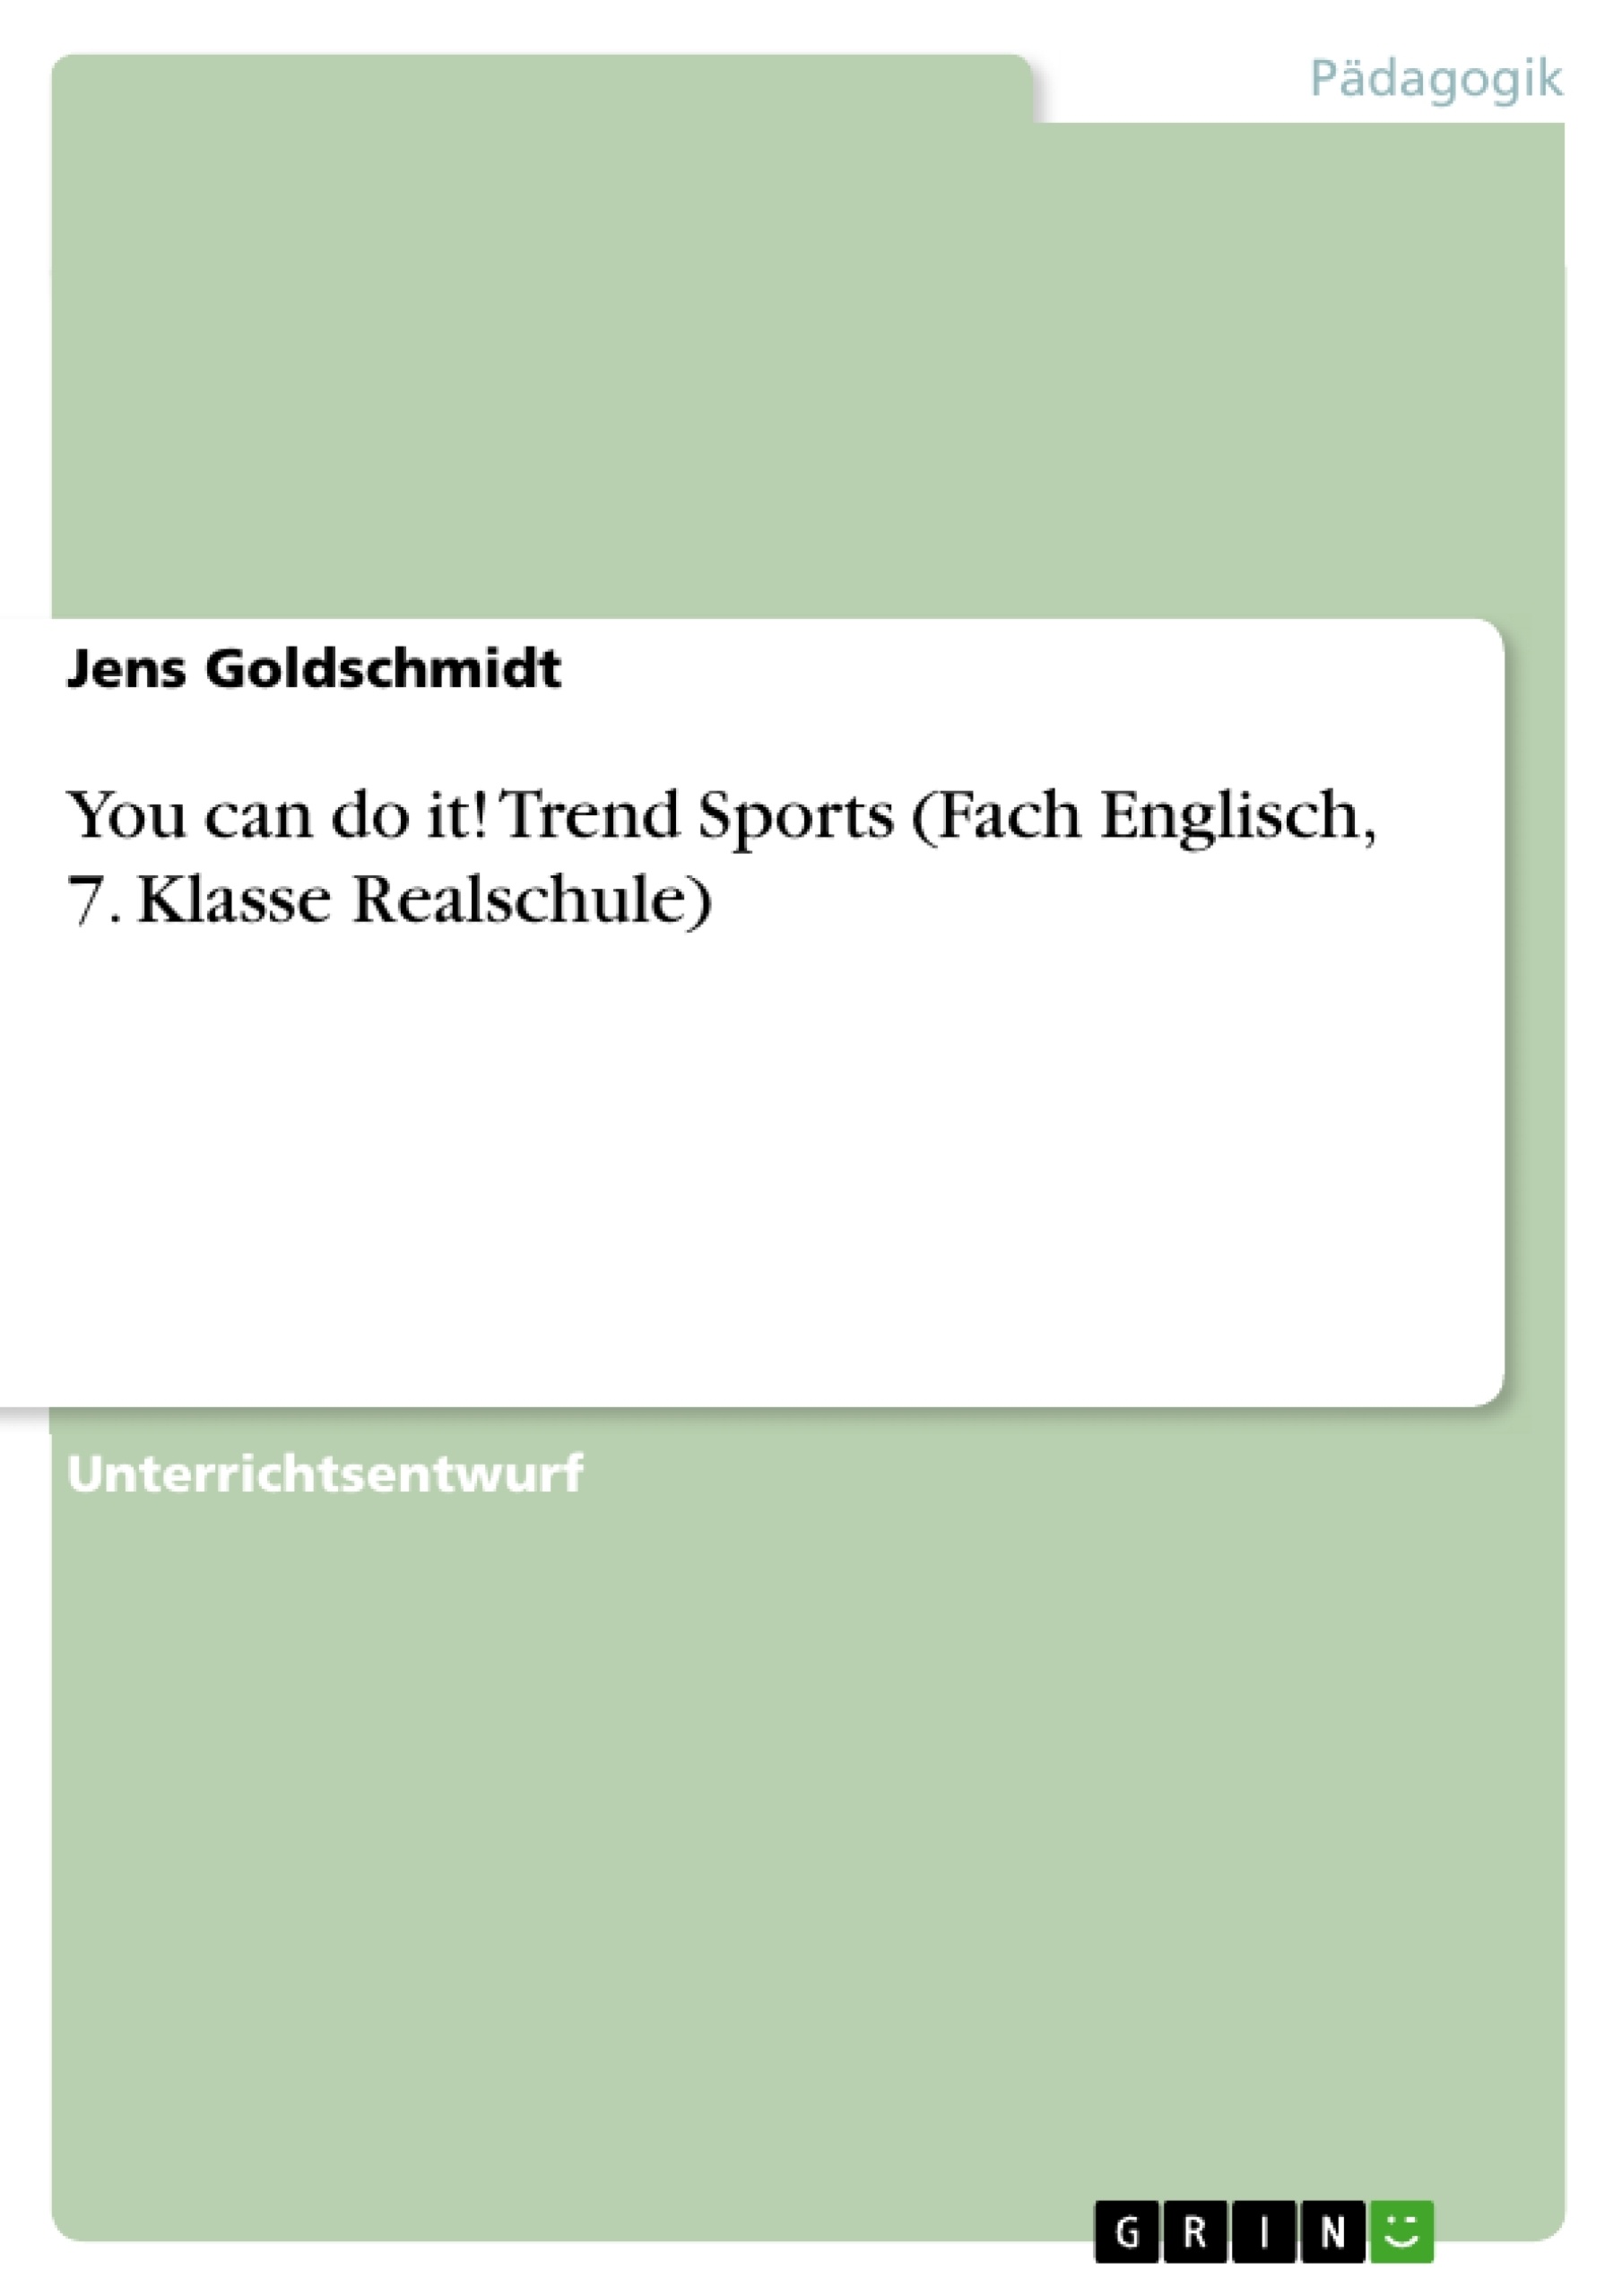 Título: You can do it! Trend Sports (Fach Englisch, 7. Klasse Realschule)